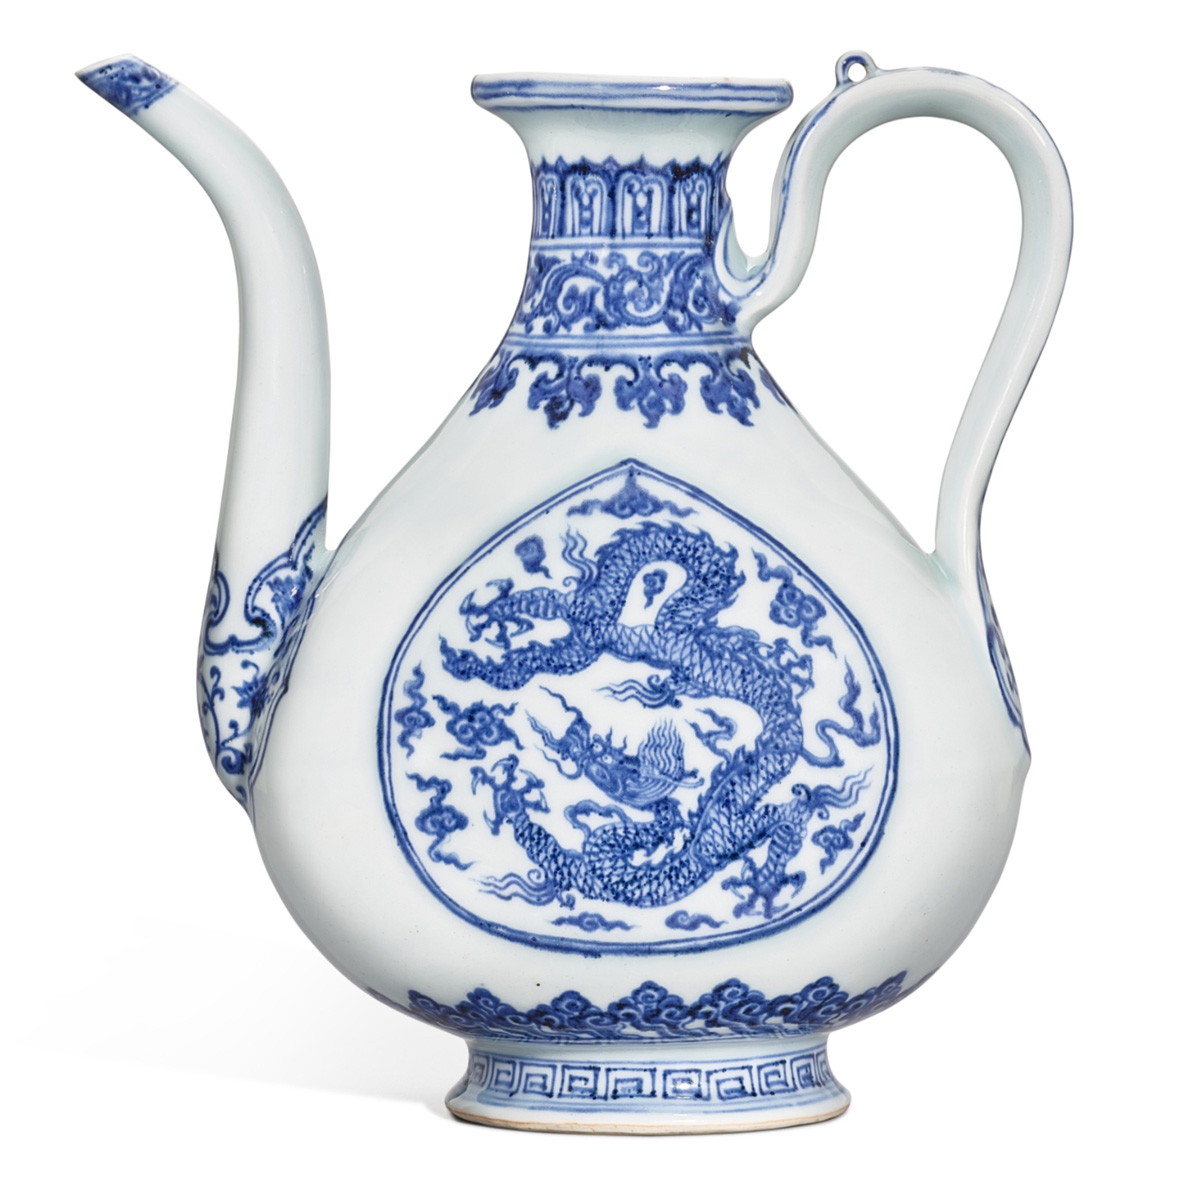 A unique and outstanding imperial blue and white dragon ewer